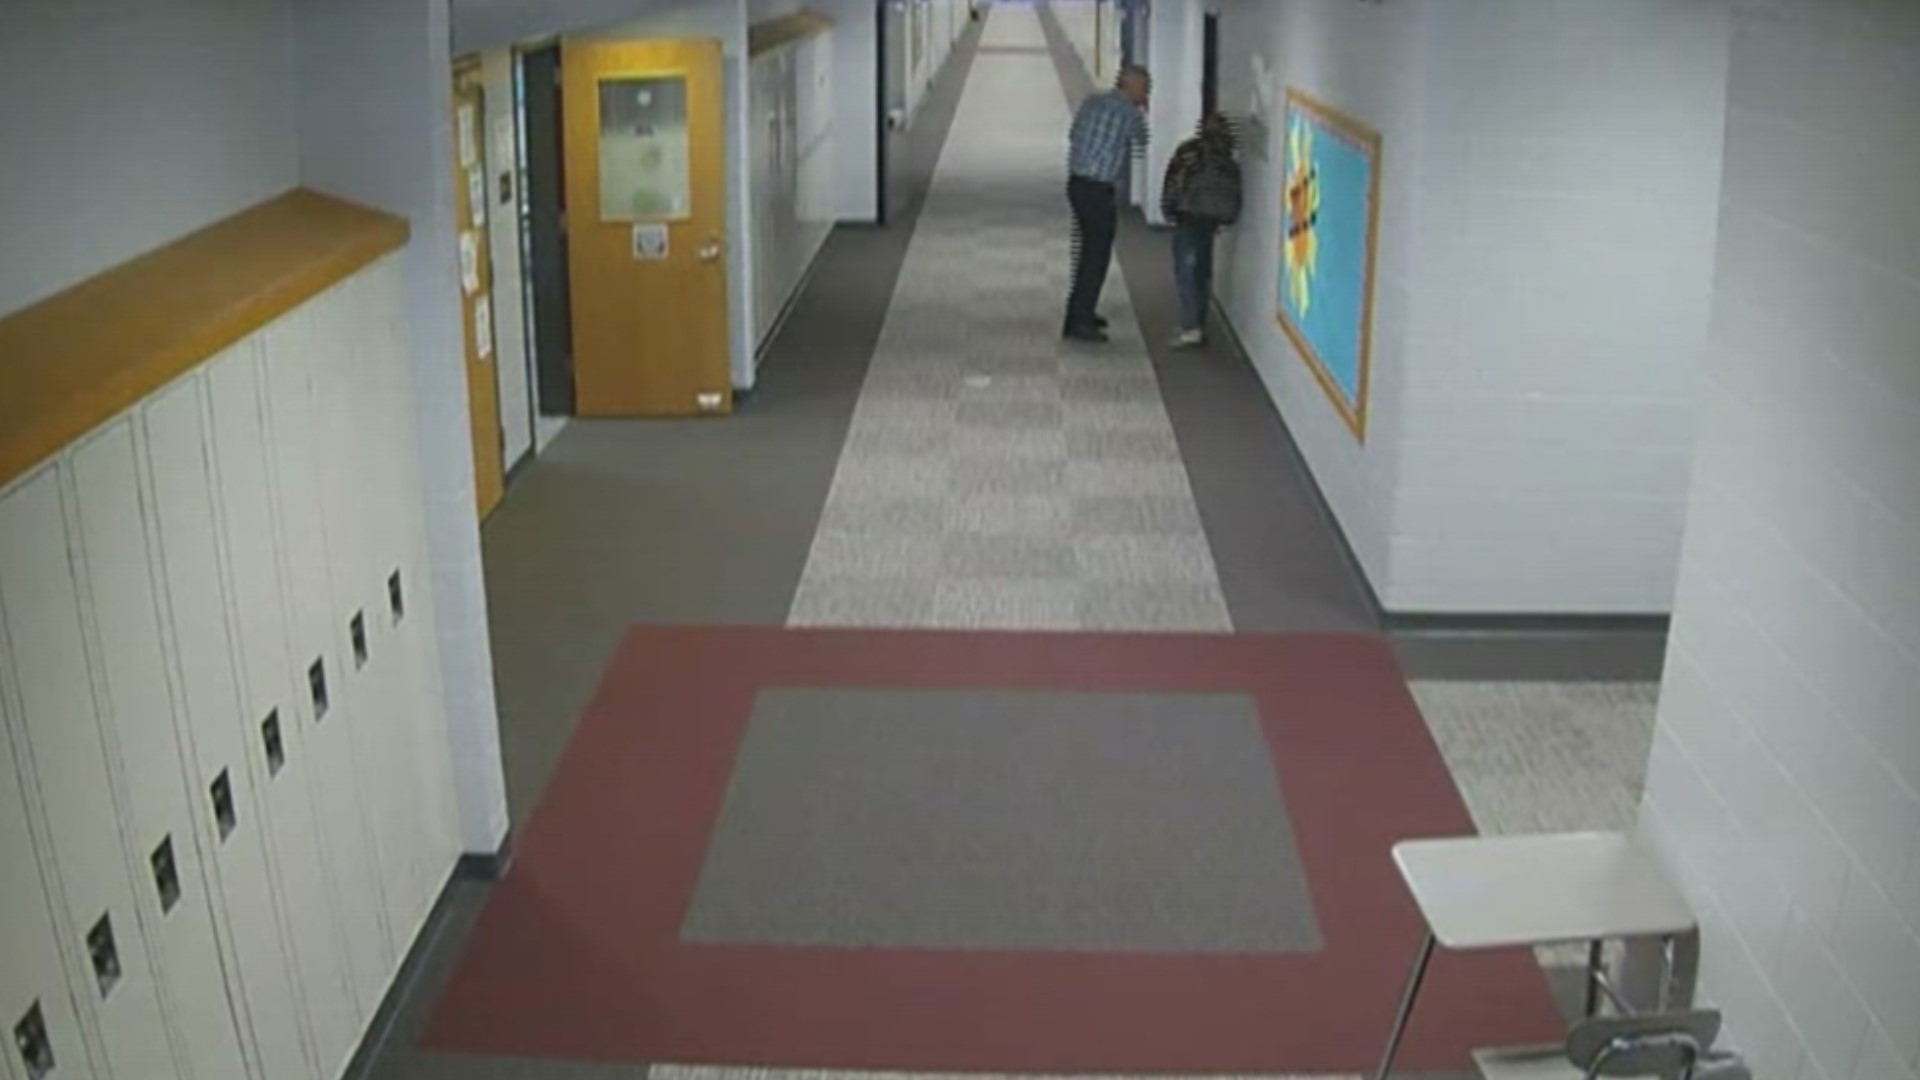 Security video shows Jimtown H.S. teacher Mike Hosinski slapping a student. (WARNING: This video may be upsetting to some viewers.)